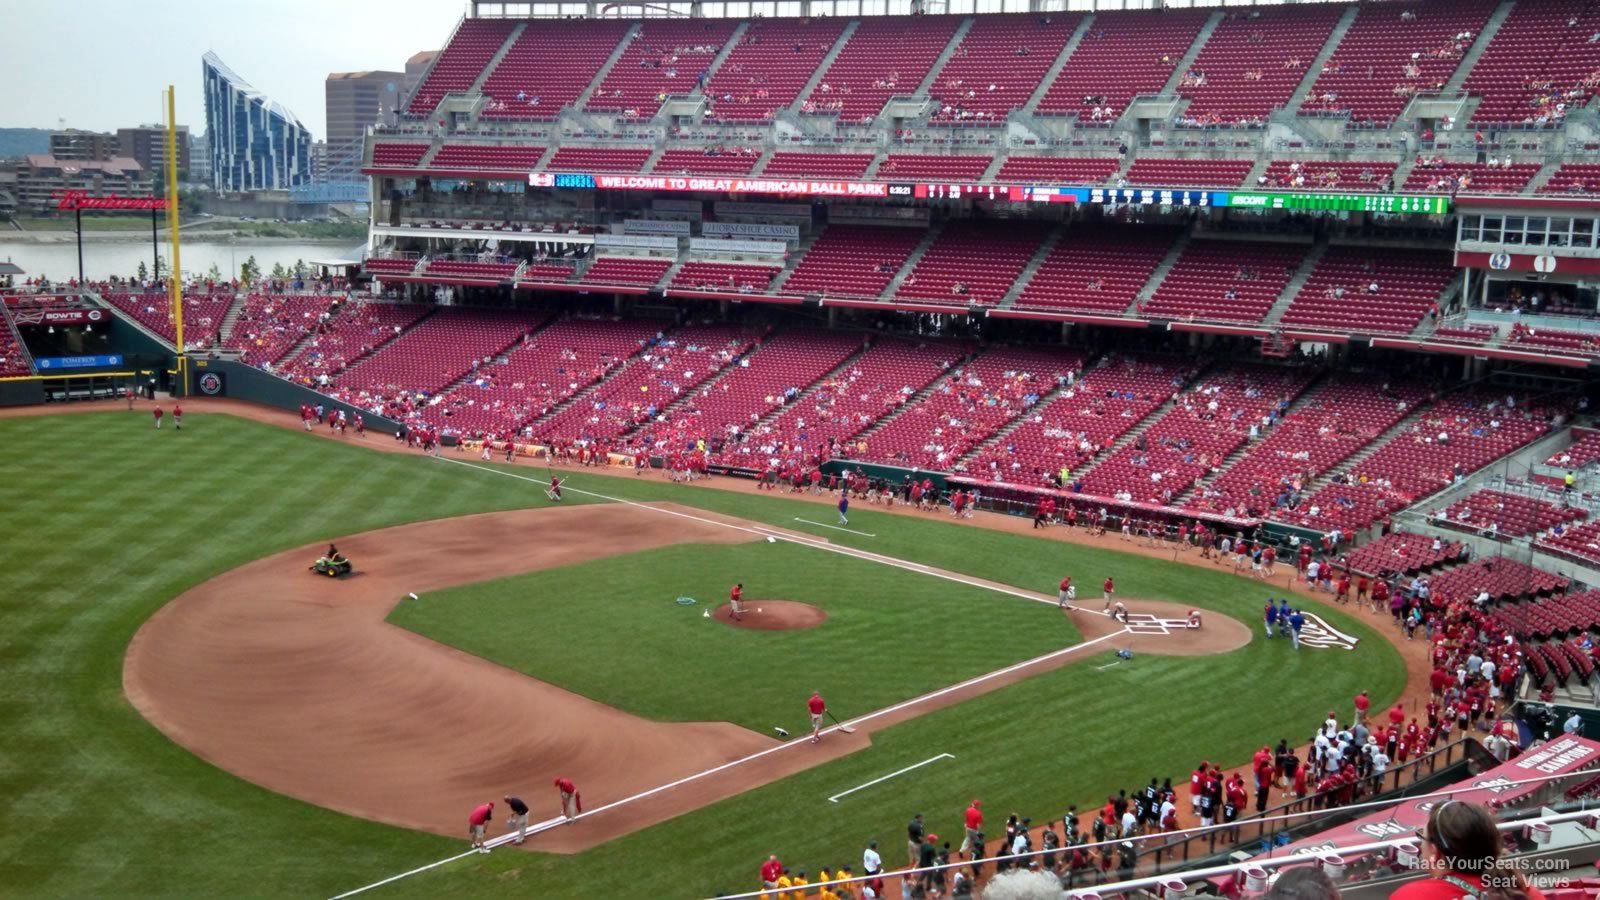 Section 414 at Great American Ball Park